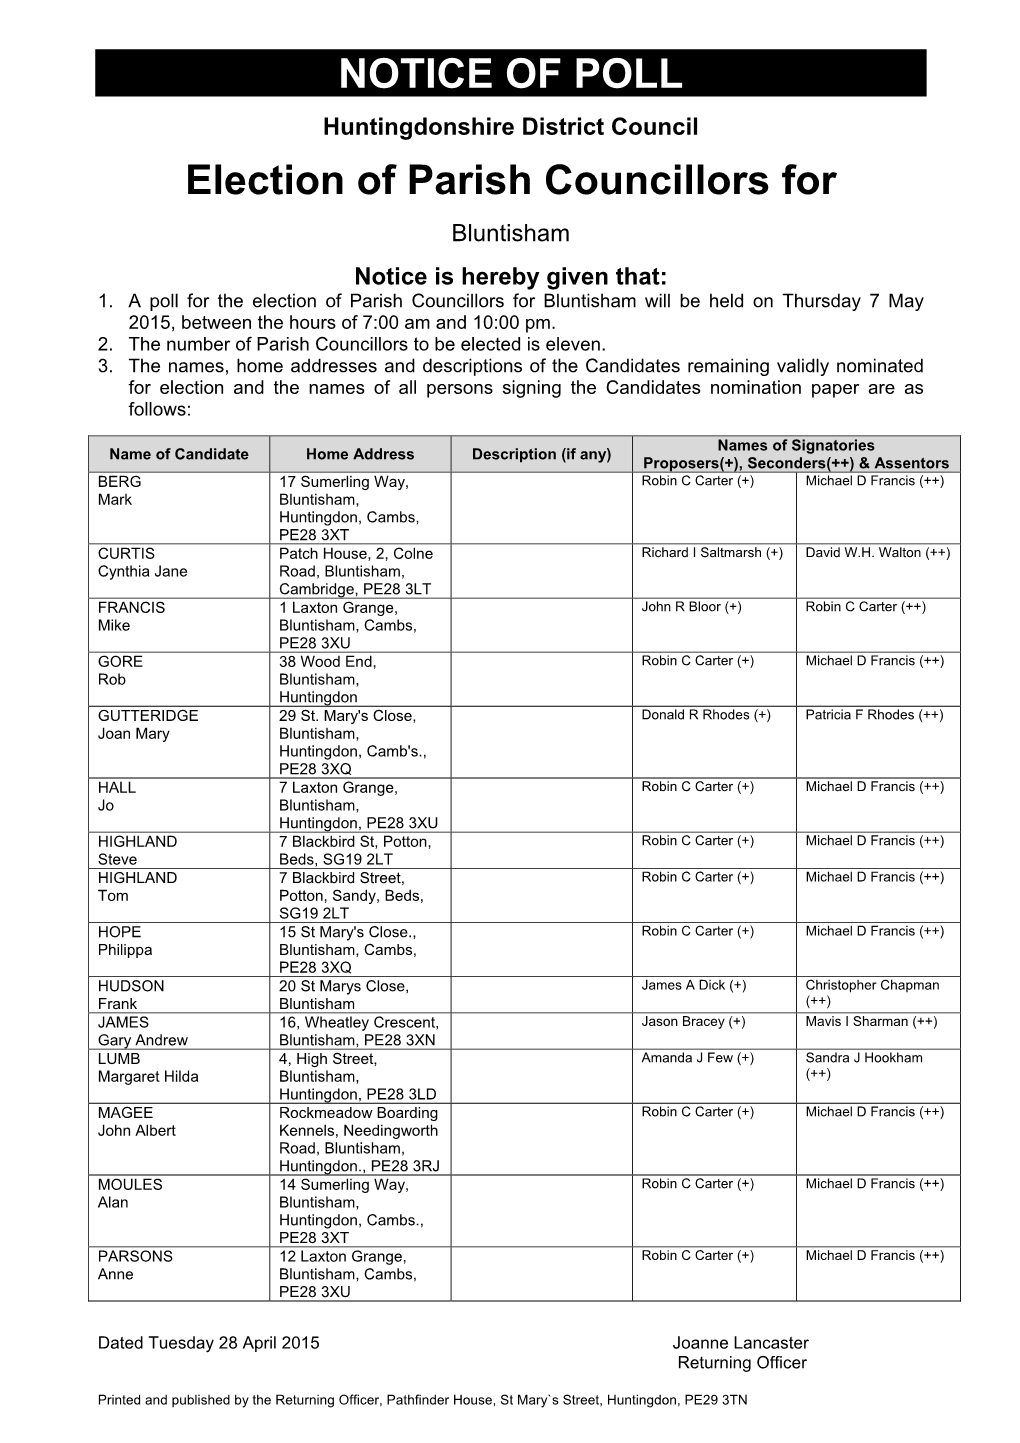 NOTICE of POLL Election of Parish Councillors